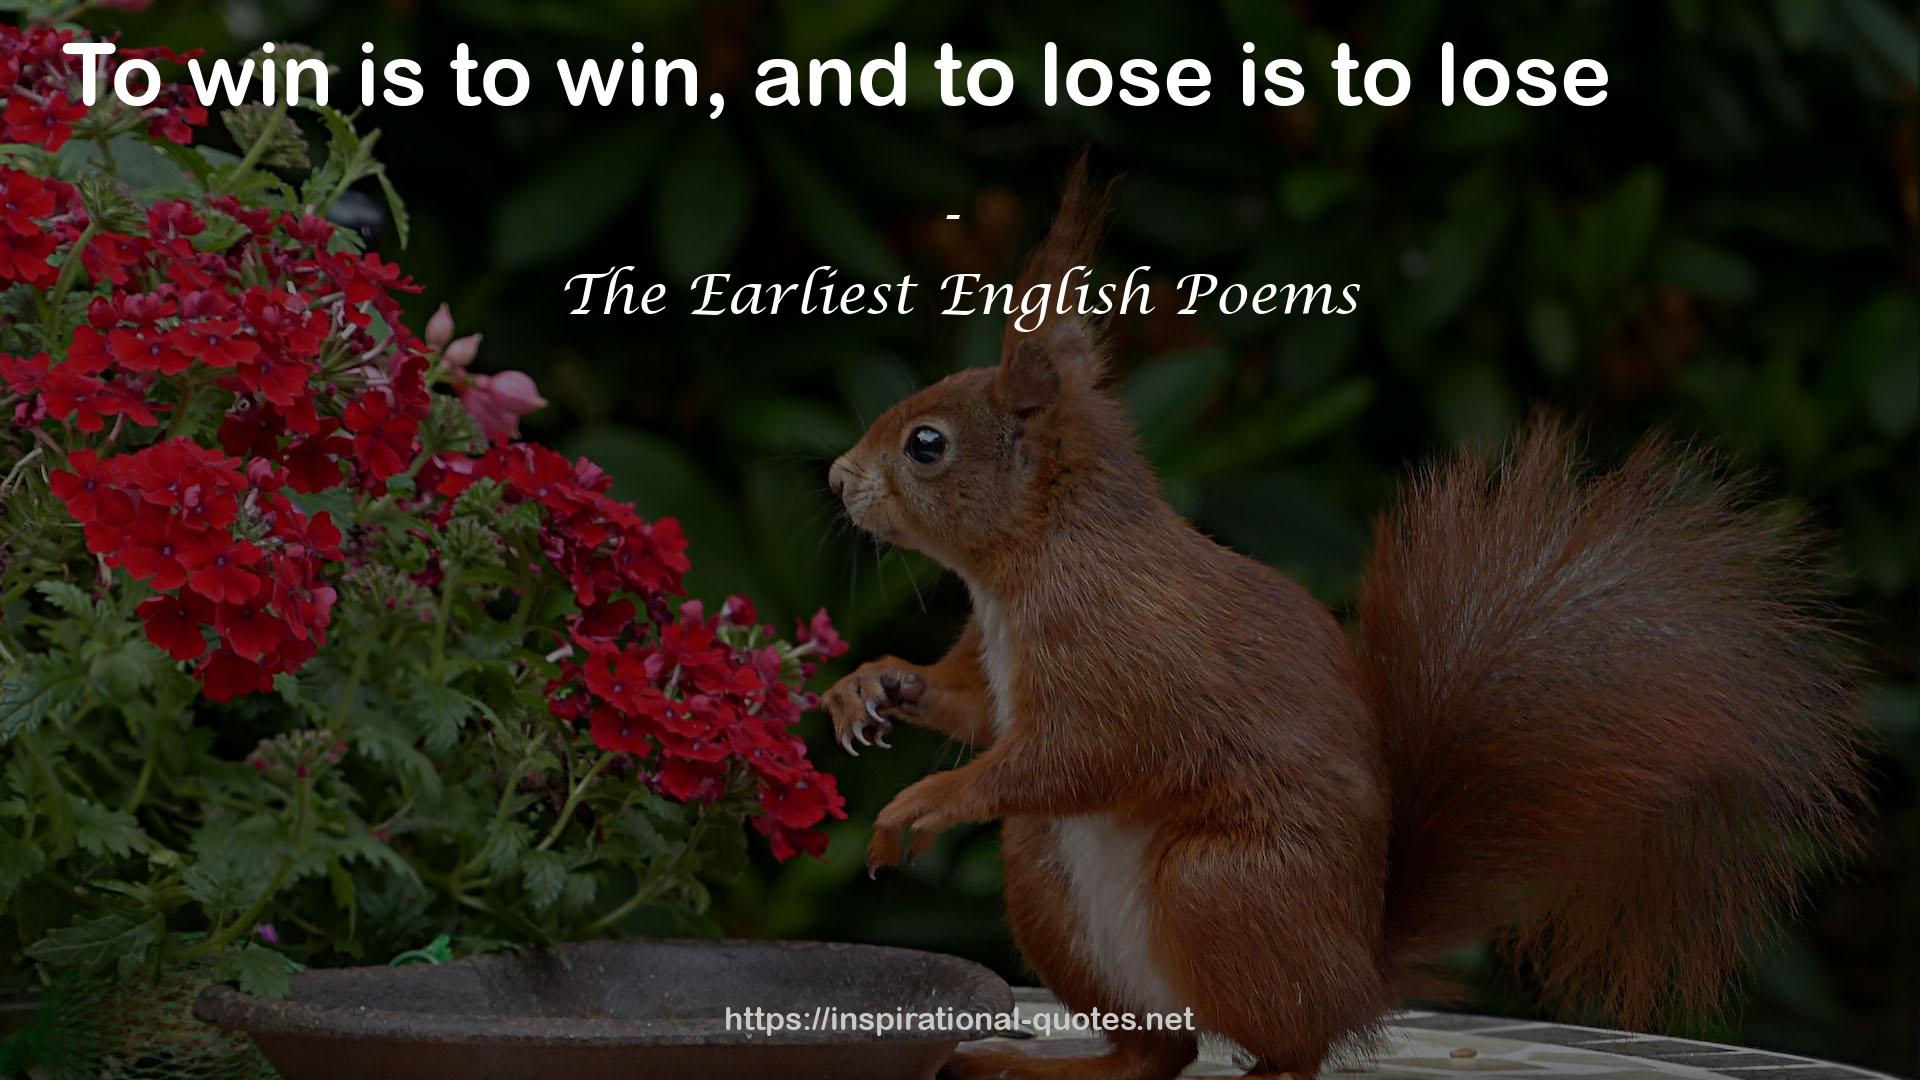 The Earliest English Poems QUOTES